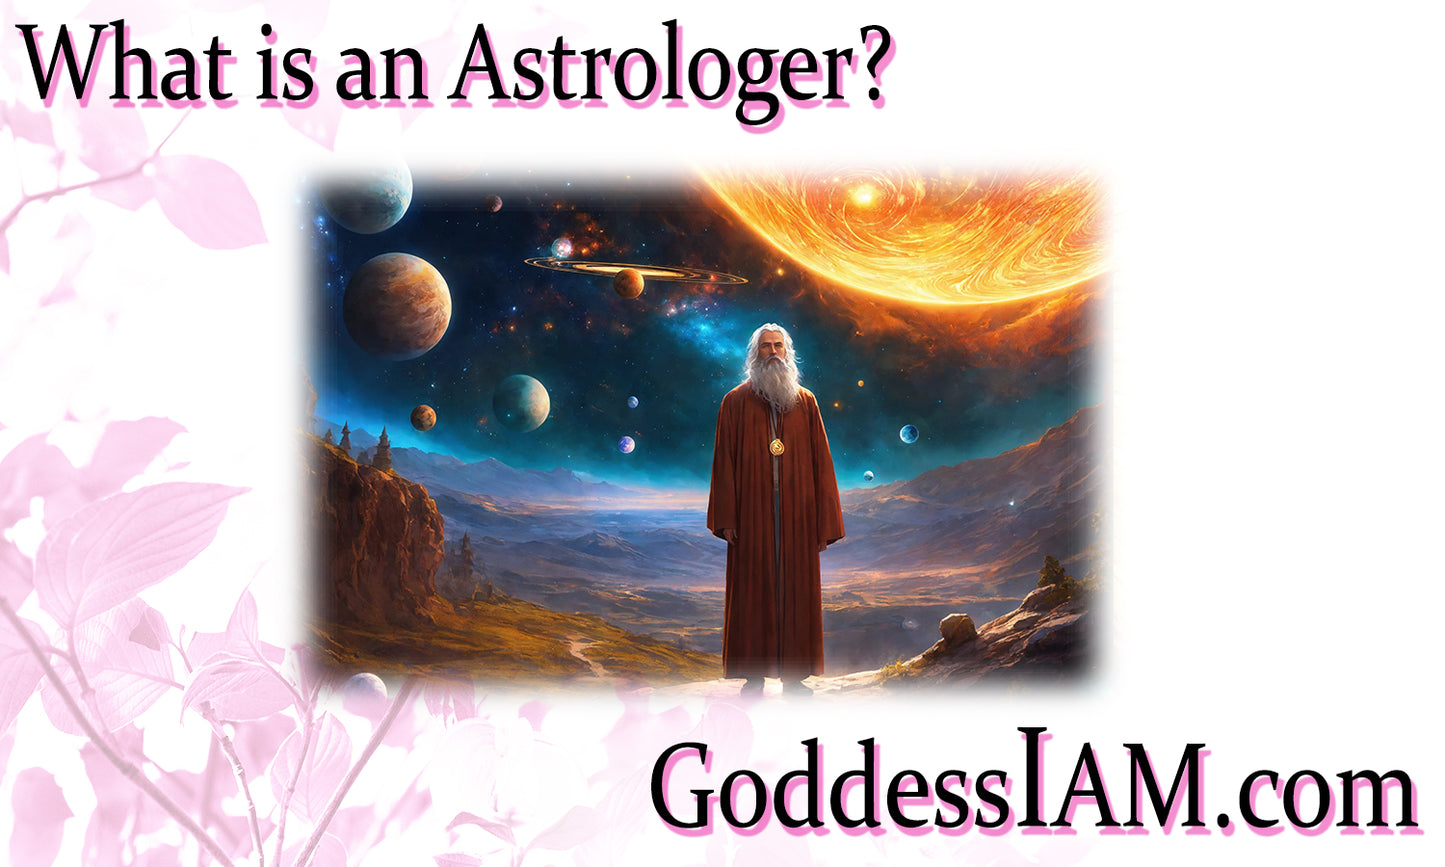 What is an Astrologer?